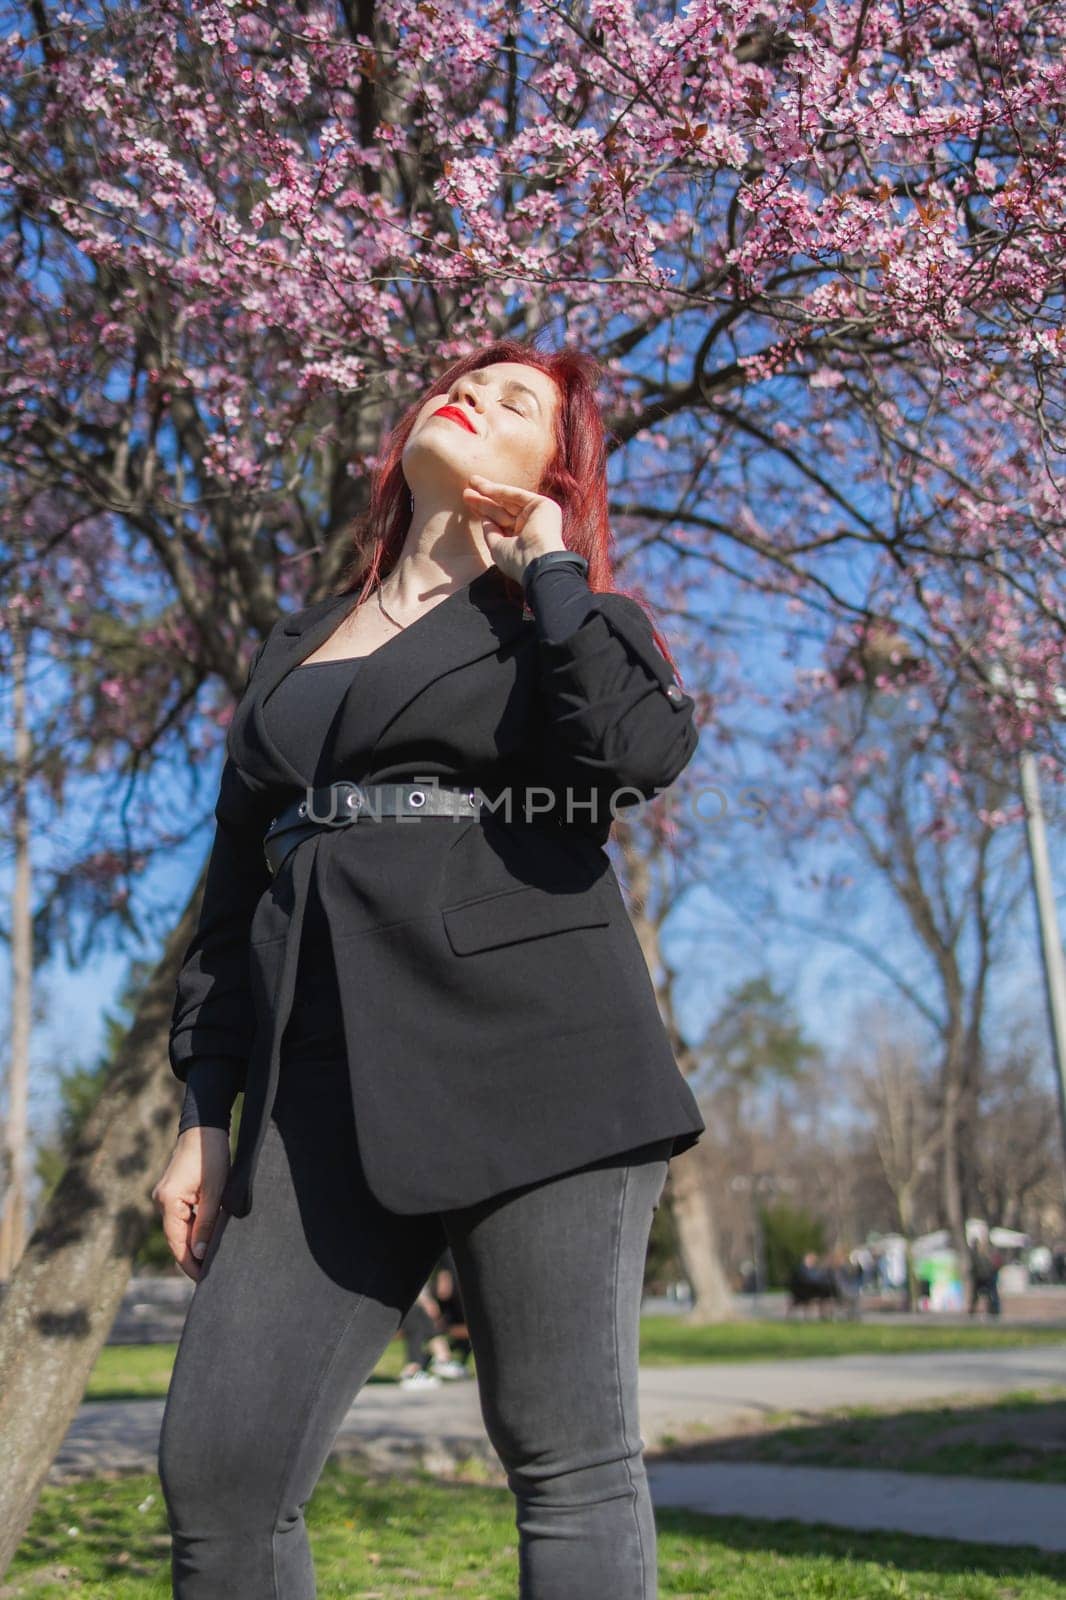 Red haired woman wearing stylish outfit near blossoming sakura in park. Fashionable spring look. Springtime blooming female portrait. by Satura86